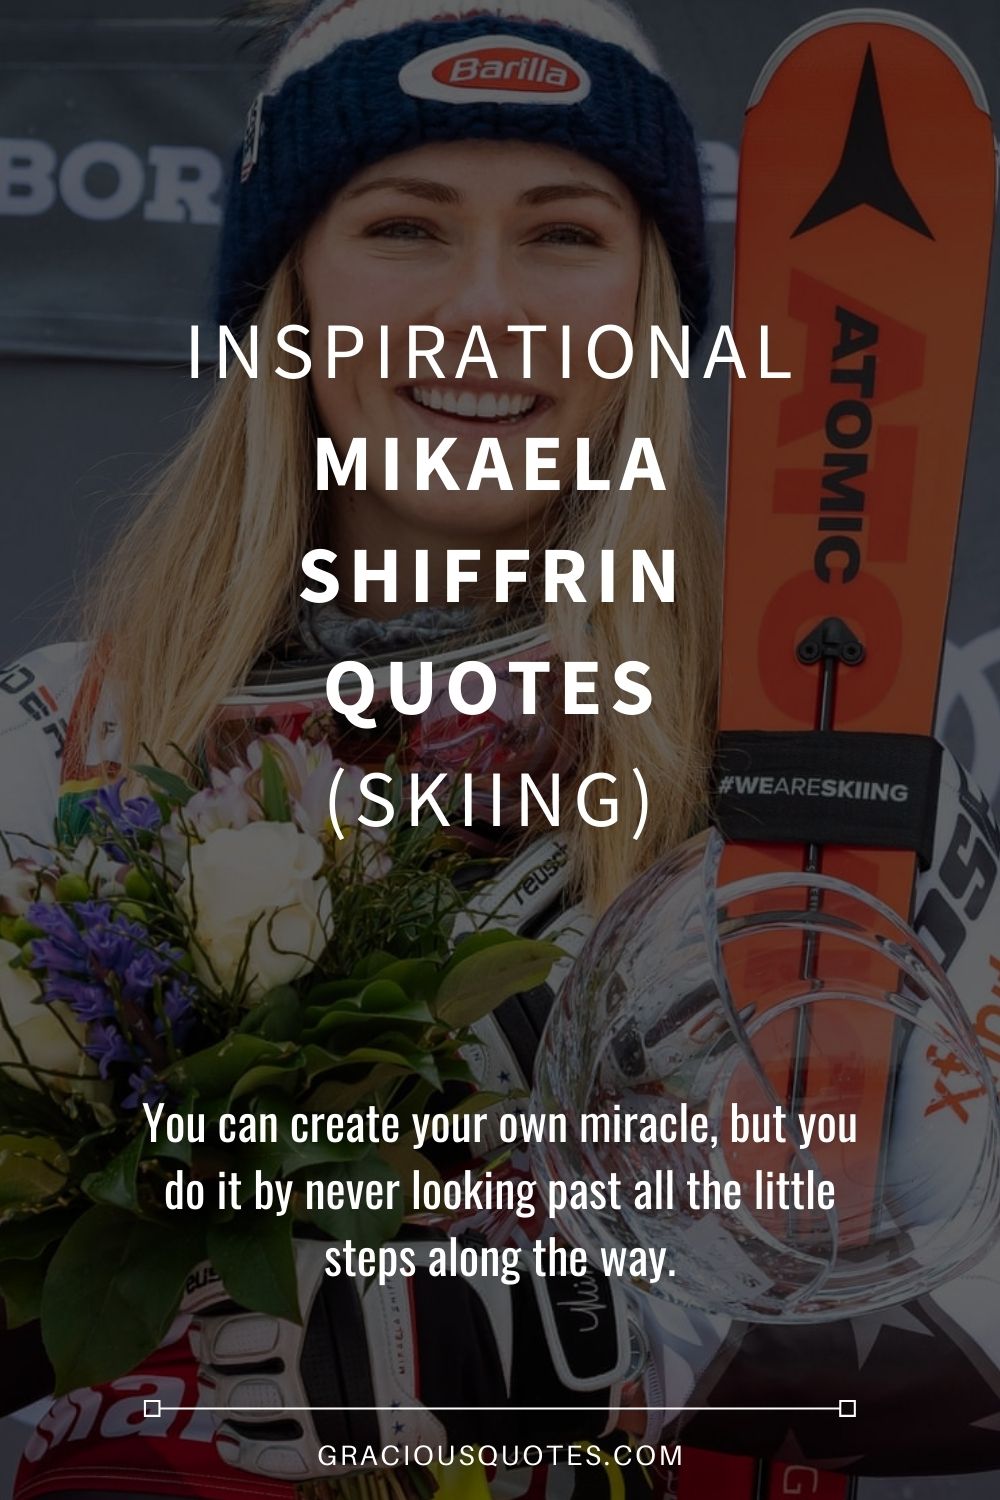 Inspirational Mikaela Shiffrin Quotes (SKIING) - Gracious Quotes